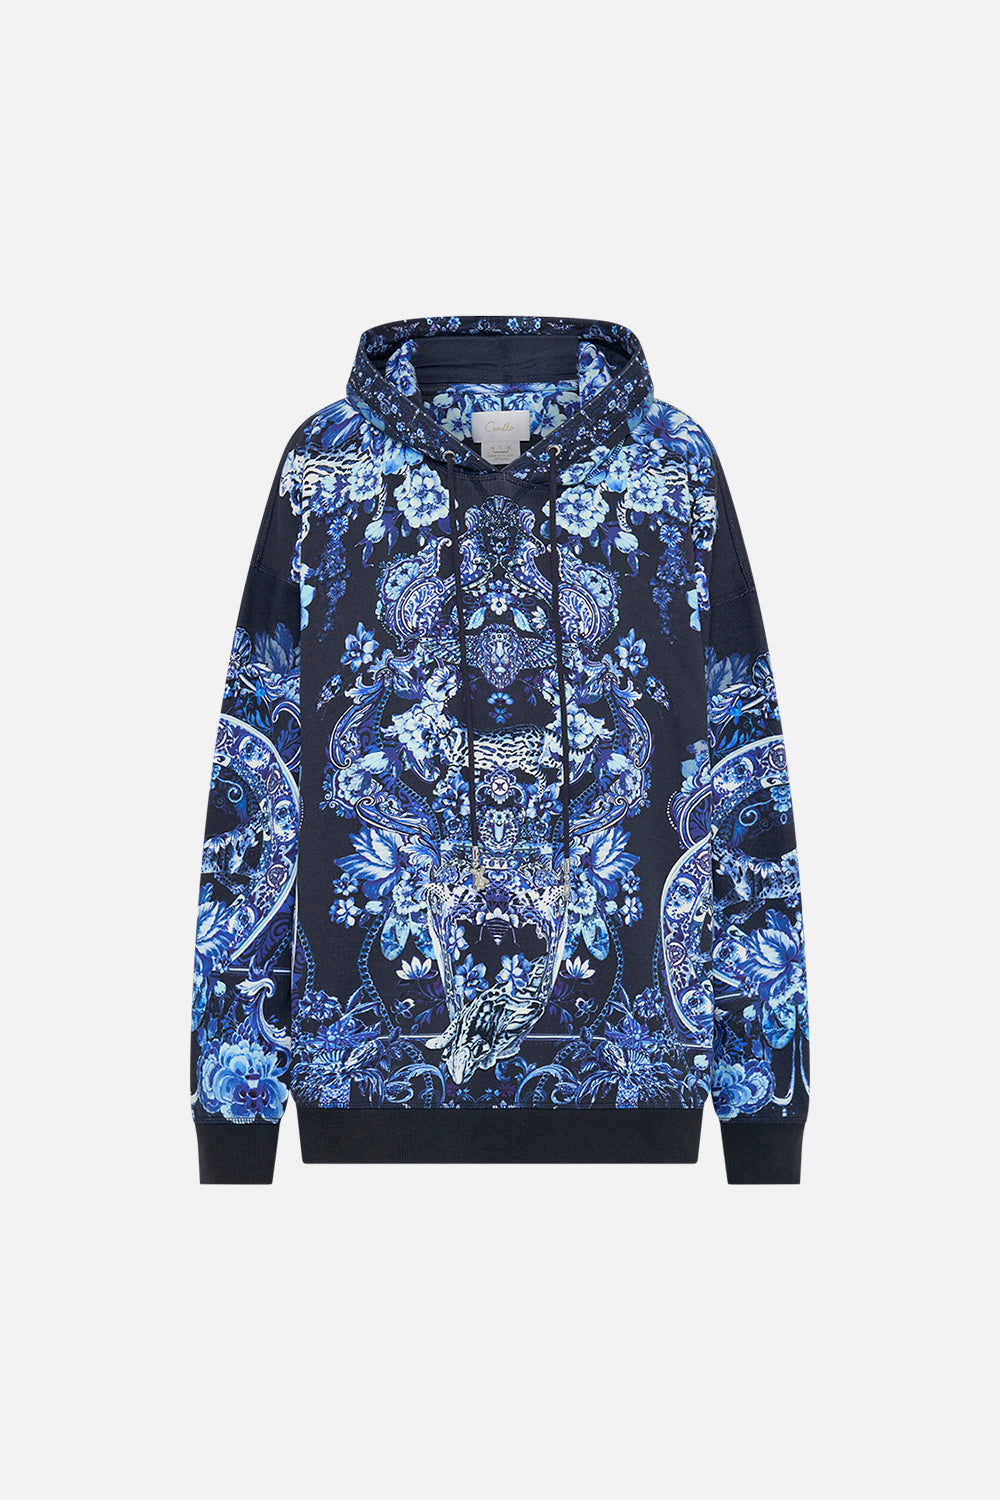 CAMILLA printed hoodie in Delft Dynasty print